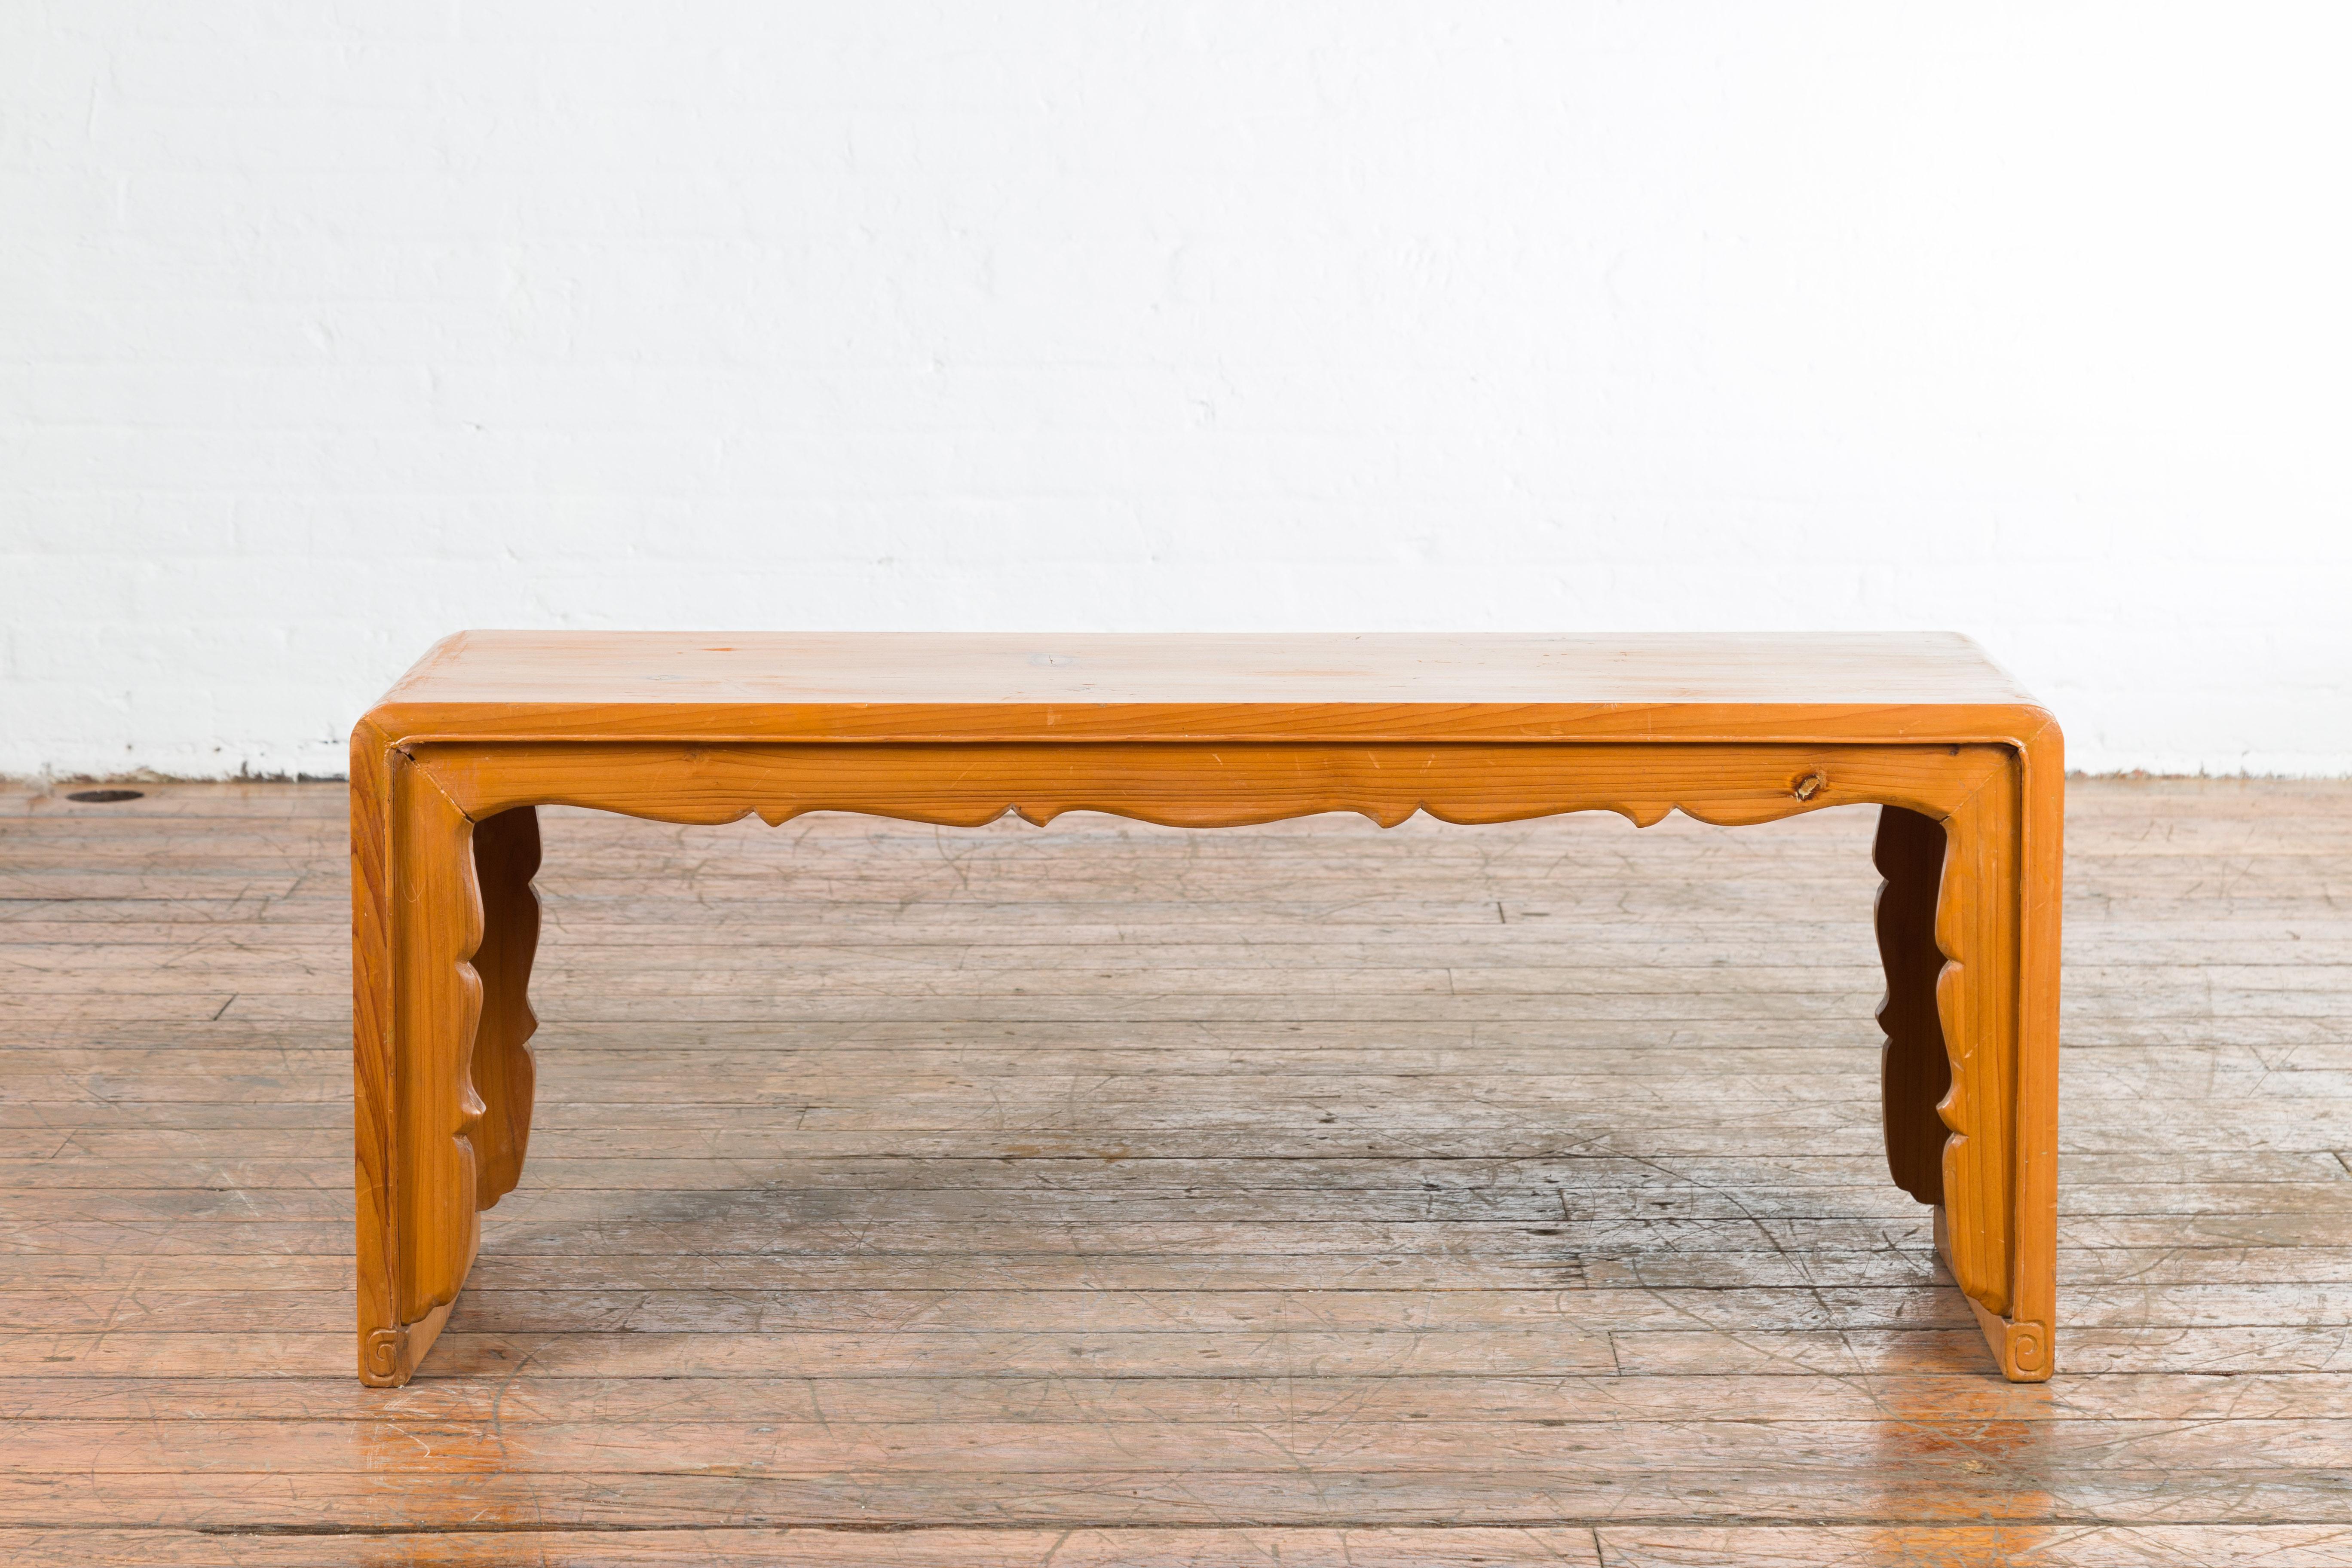 Our vintage elmwood waterfall coffee table from the mid 20th century features a beautifully carved apron that cascades down the side legs of the vintage coffee table. The waterfall design coupled with the artistically crafted carvings makes this